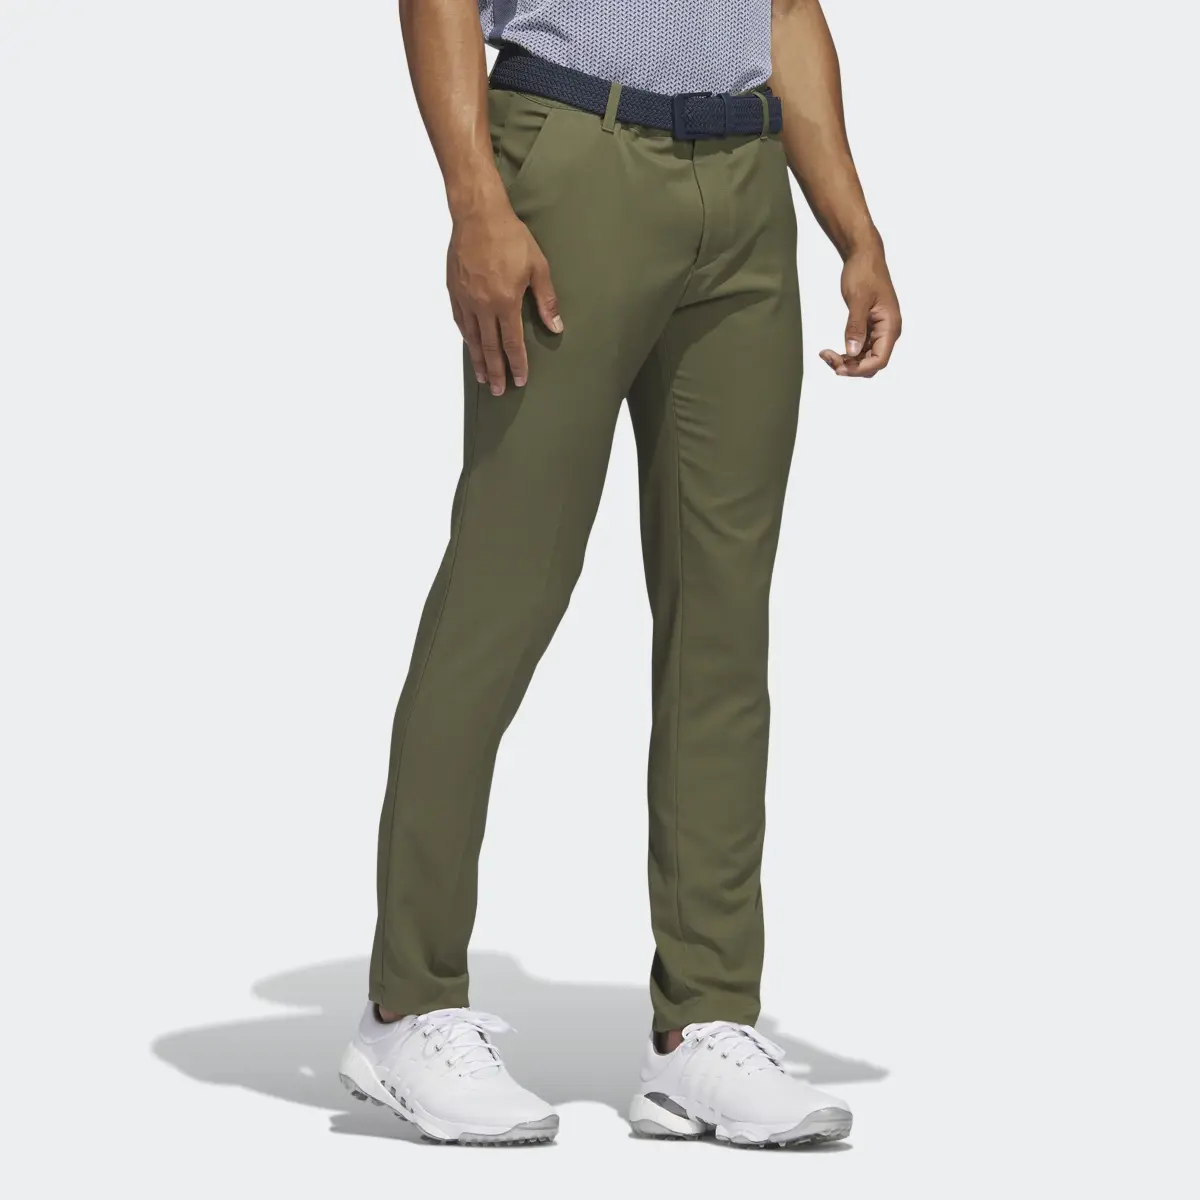 Adidas Ultimate365 Tapered Pants. 3